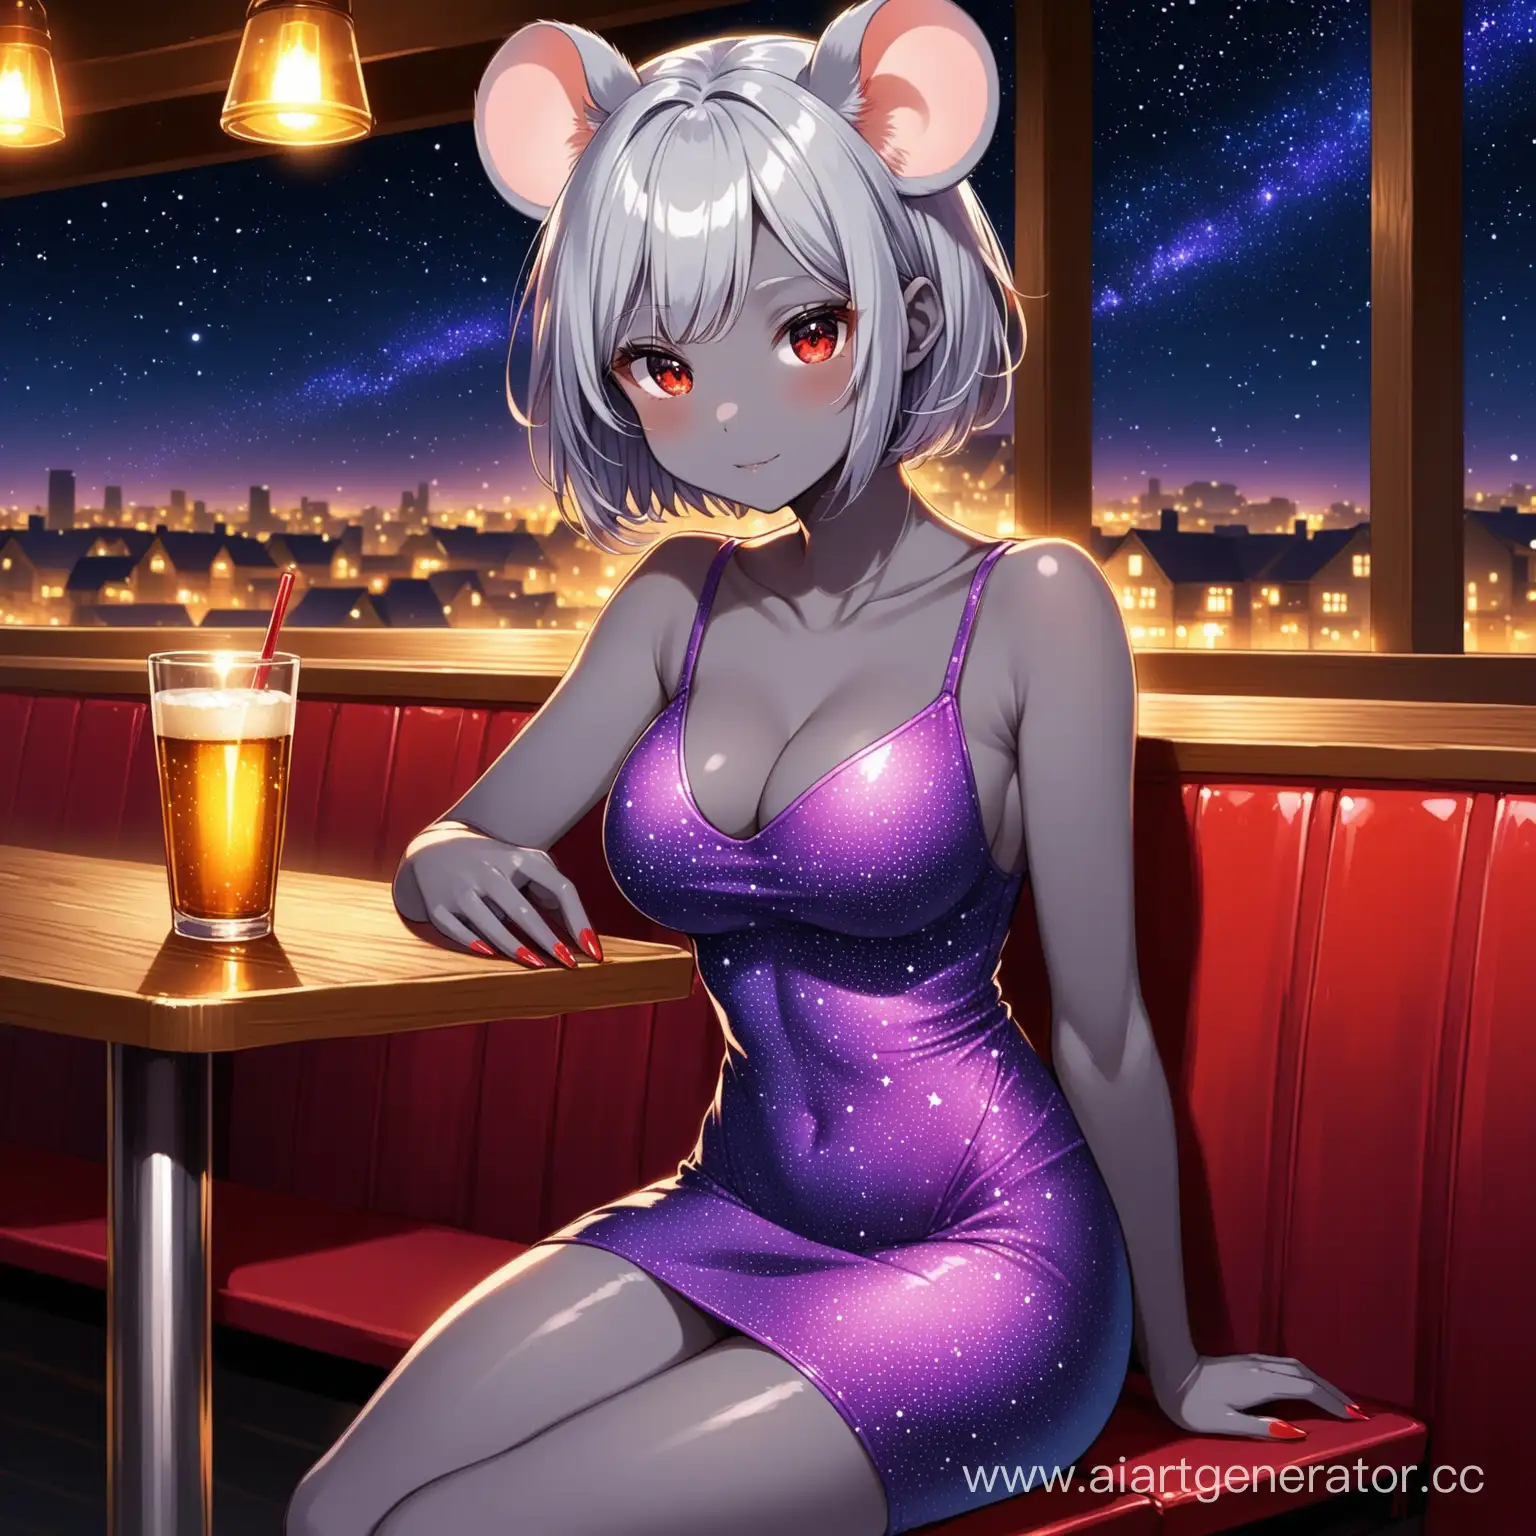 Urban-Tavern-Encounter-Enigmatic-Mouse-Girl-with-Starry-Sky-Dress